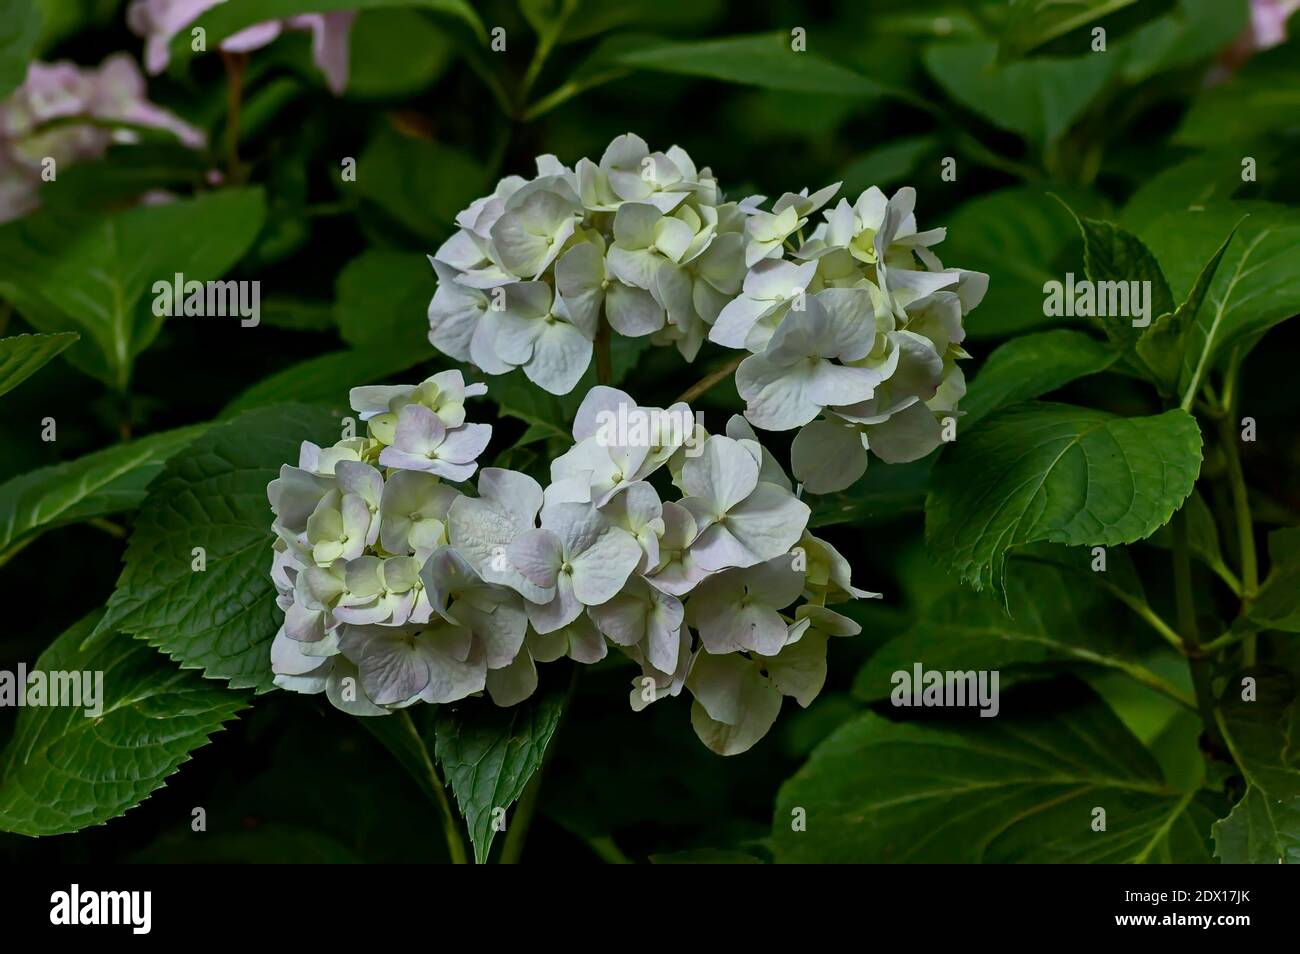 Multiple white hydrangea plant or hortensia flower with bloom and ...